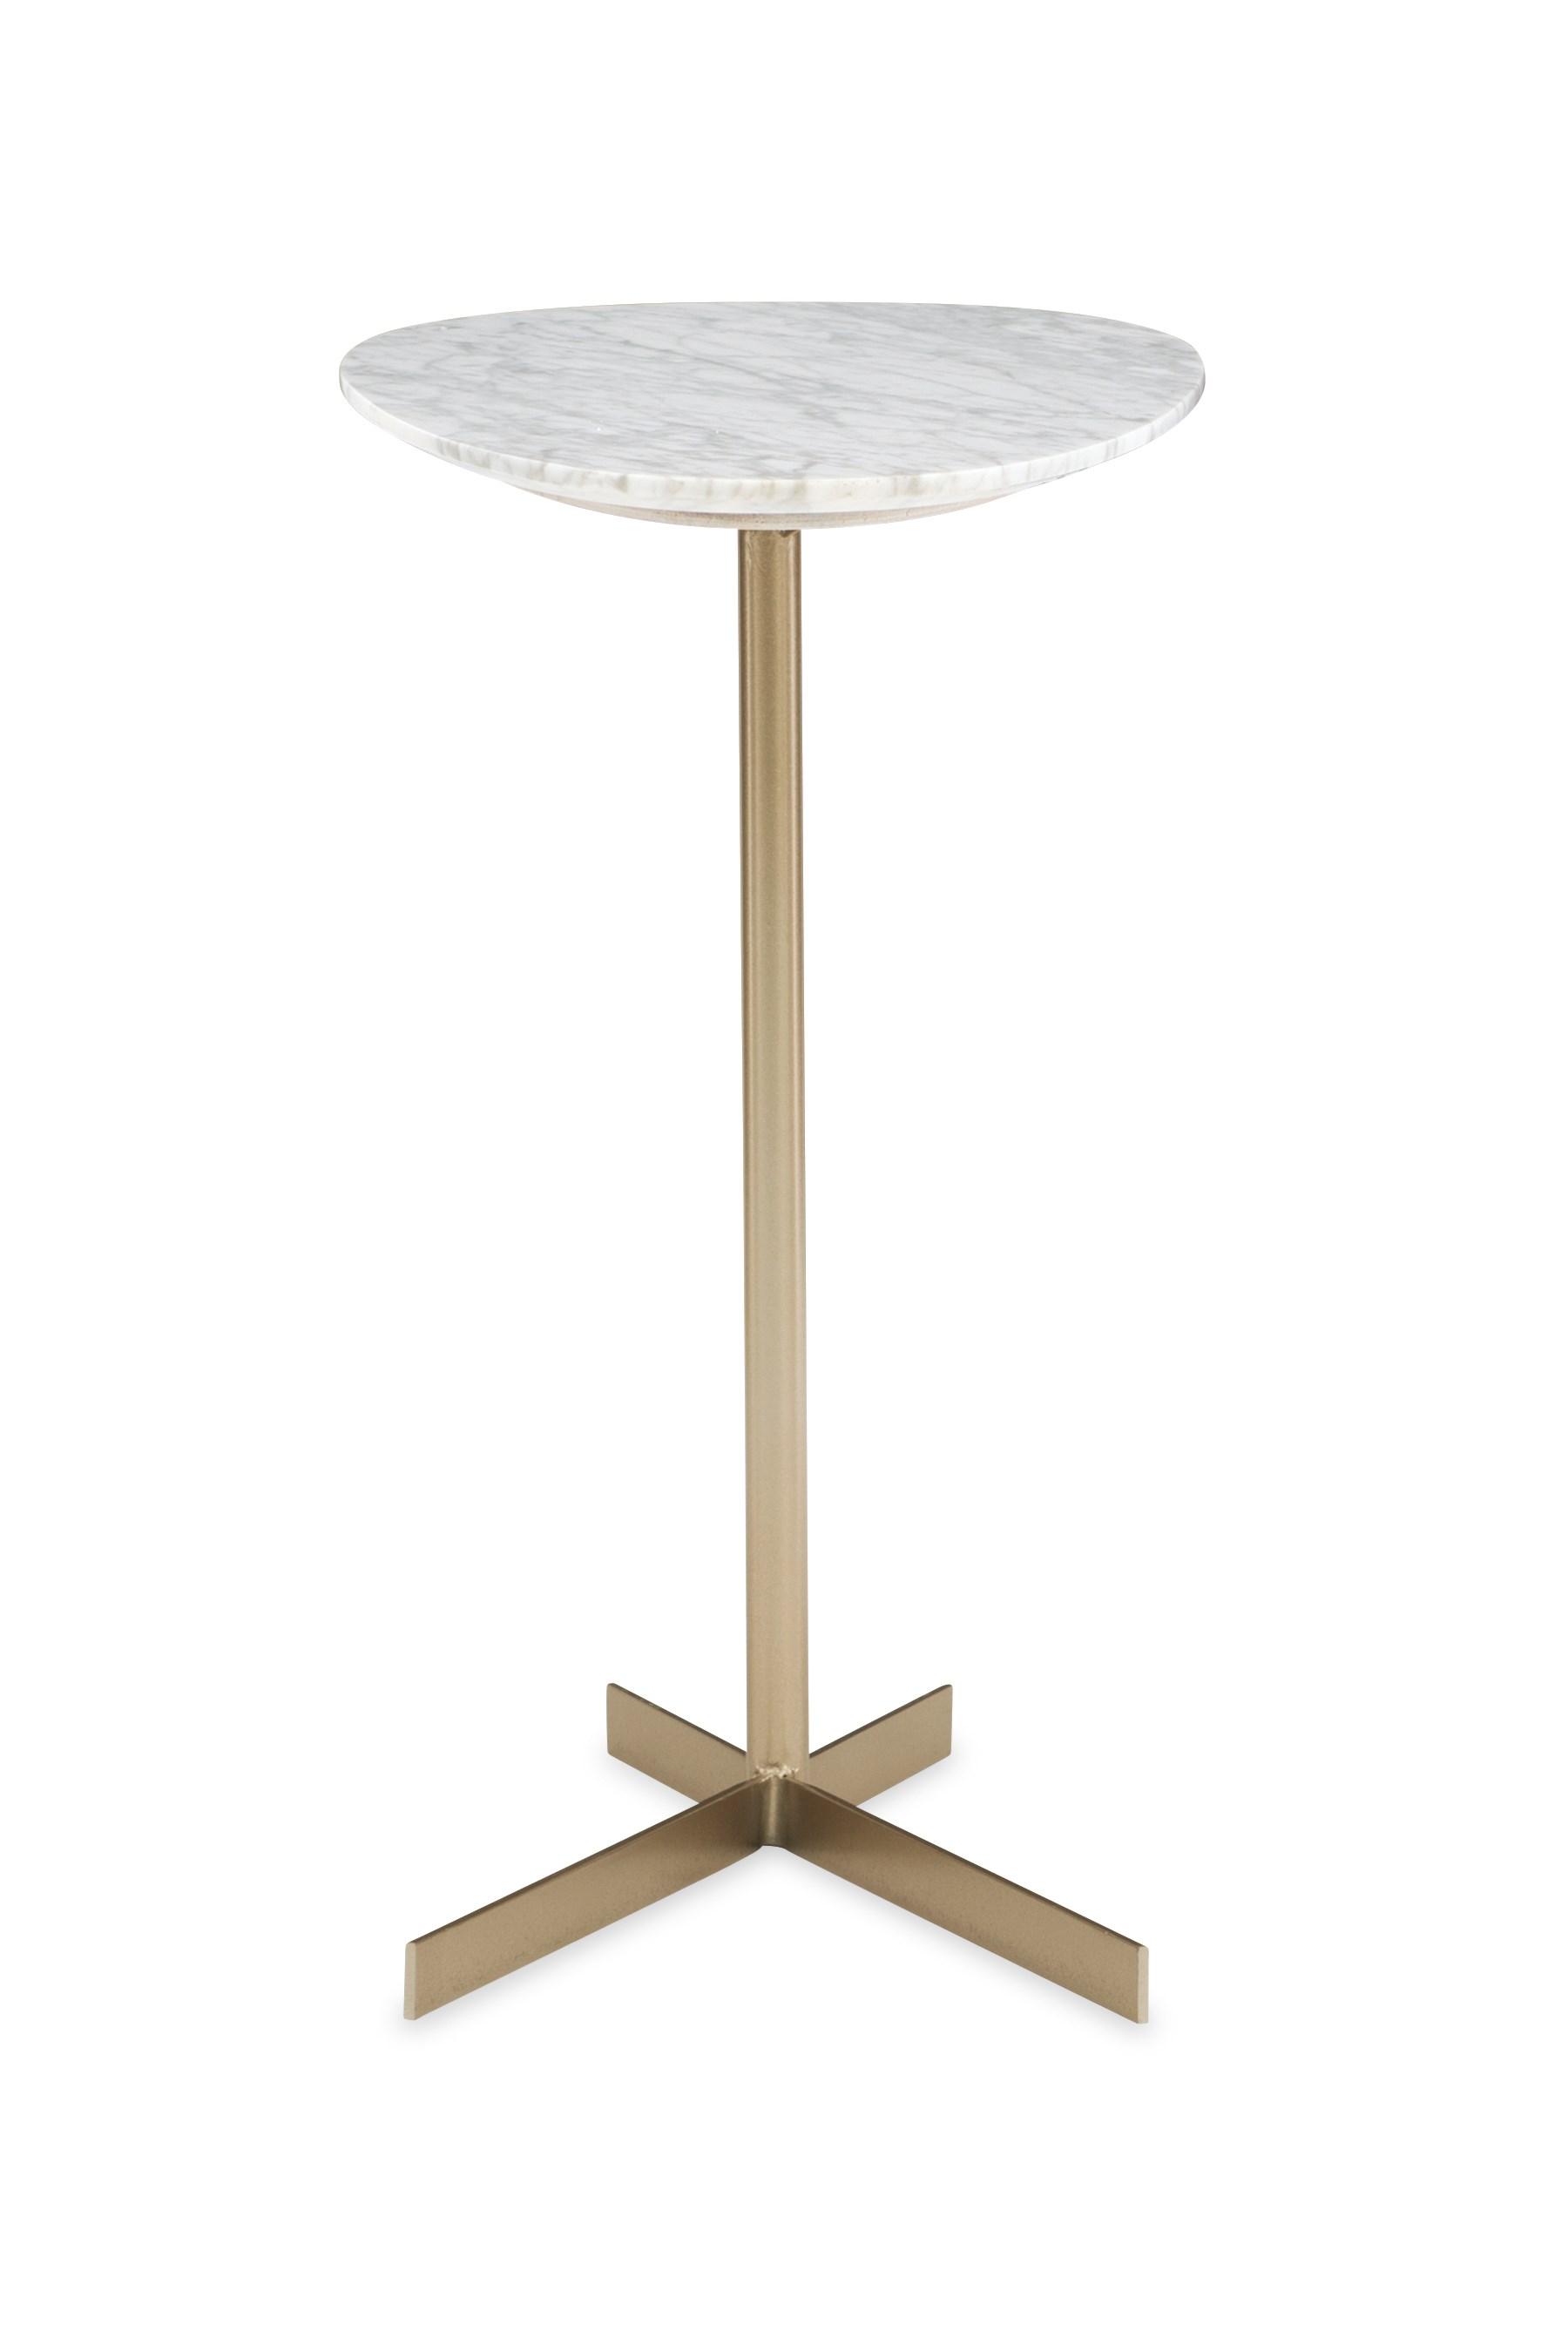 Contemporary End Table BOUNDLESS ACCENT TABLE M101-419-423 in Marble, Gold 